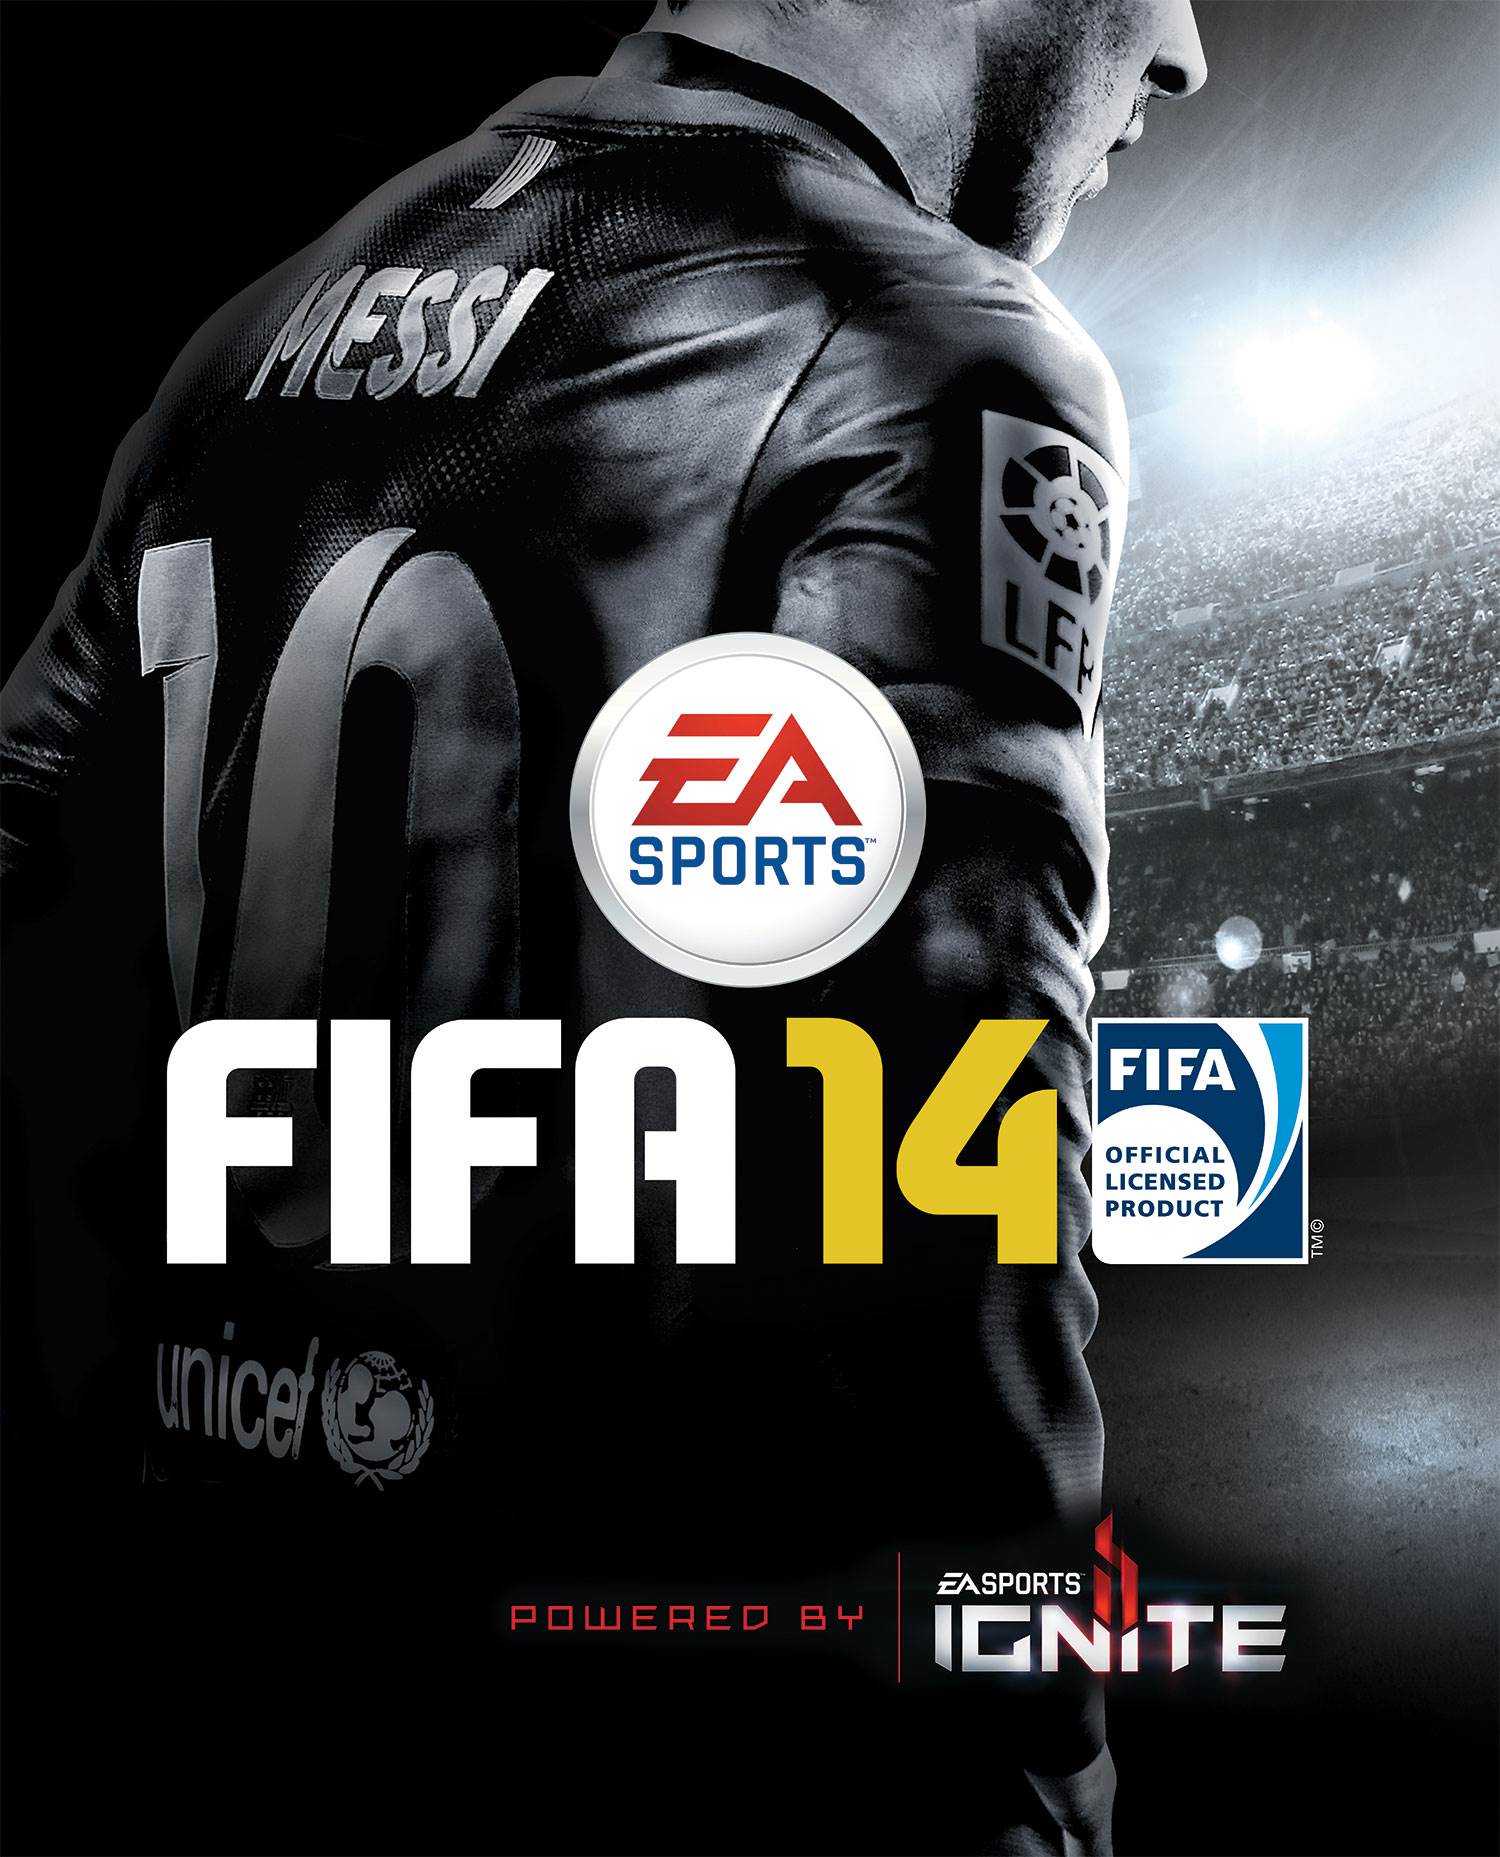 FIFA 14 WALLPAPERS IN HD « GamingBolt: Video Game News